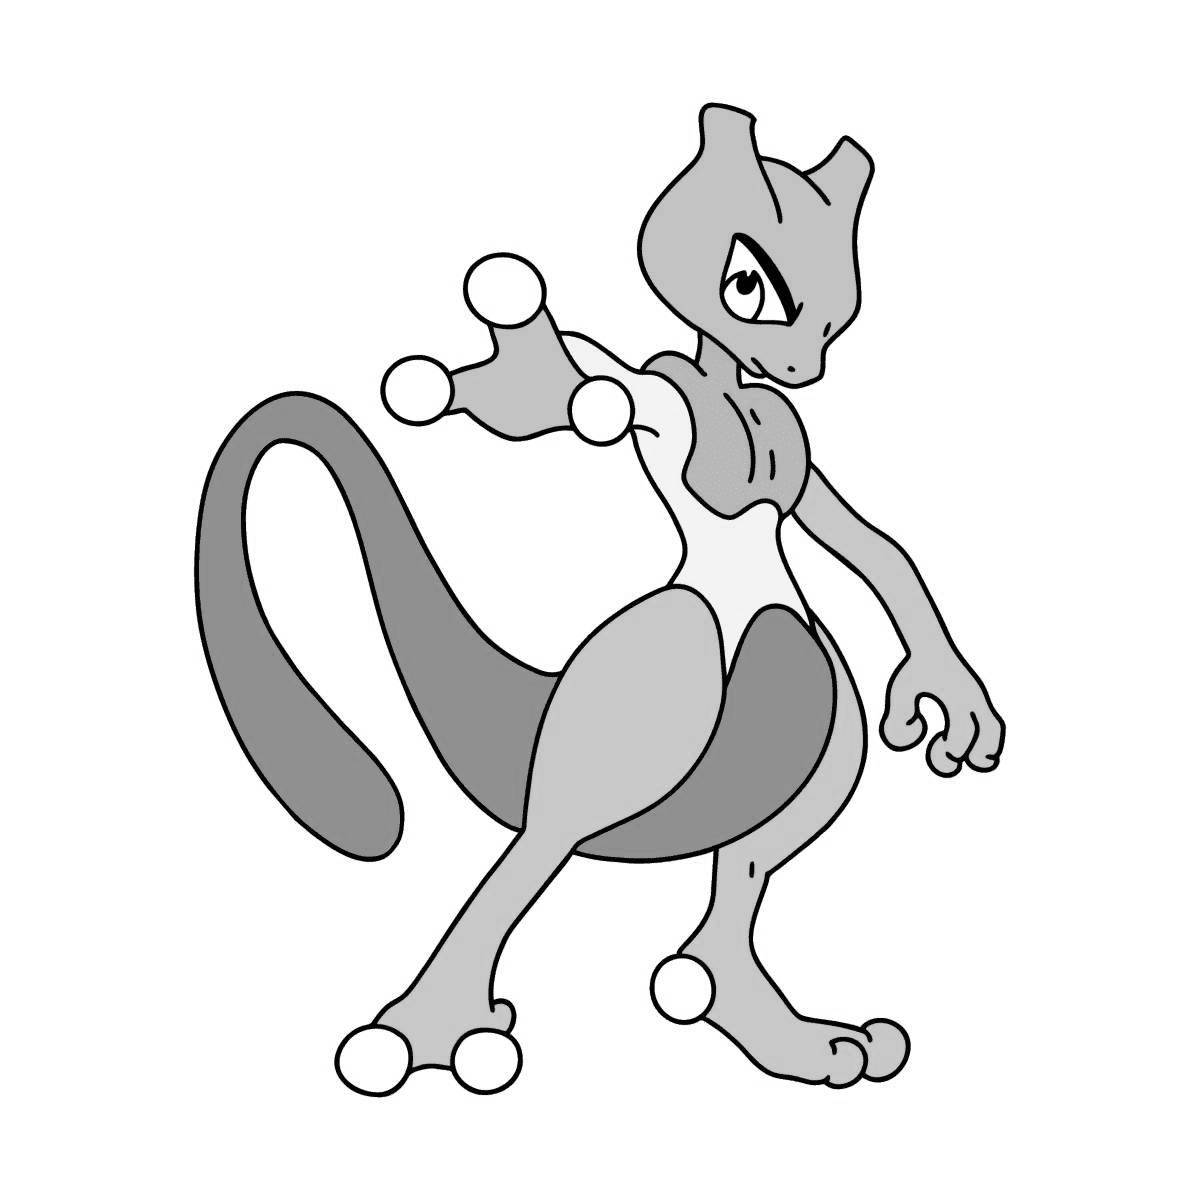 Quirky mute pokemon coloring page